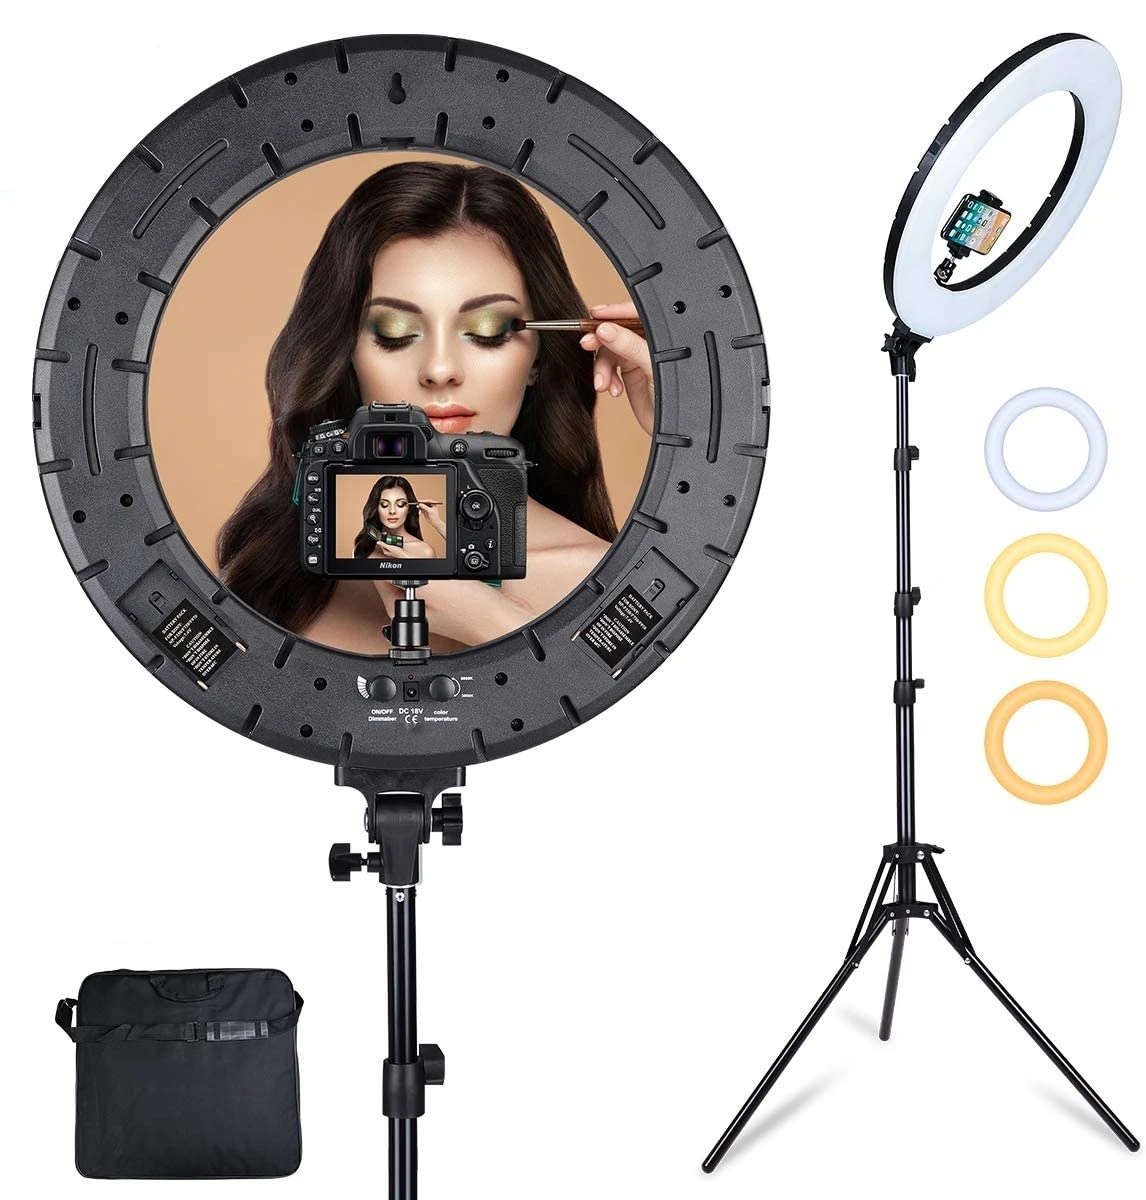 Photo/Studio/Phone/Video professional Led Ringlight with Filter Mirror Tripod Stand Led Lamp Ring Light for photography light.jpg